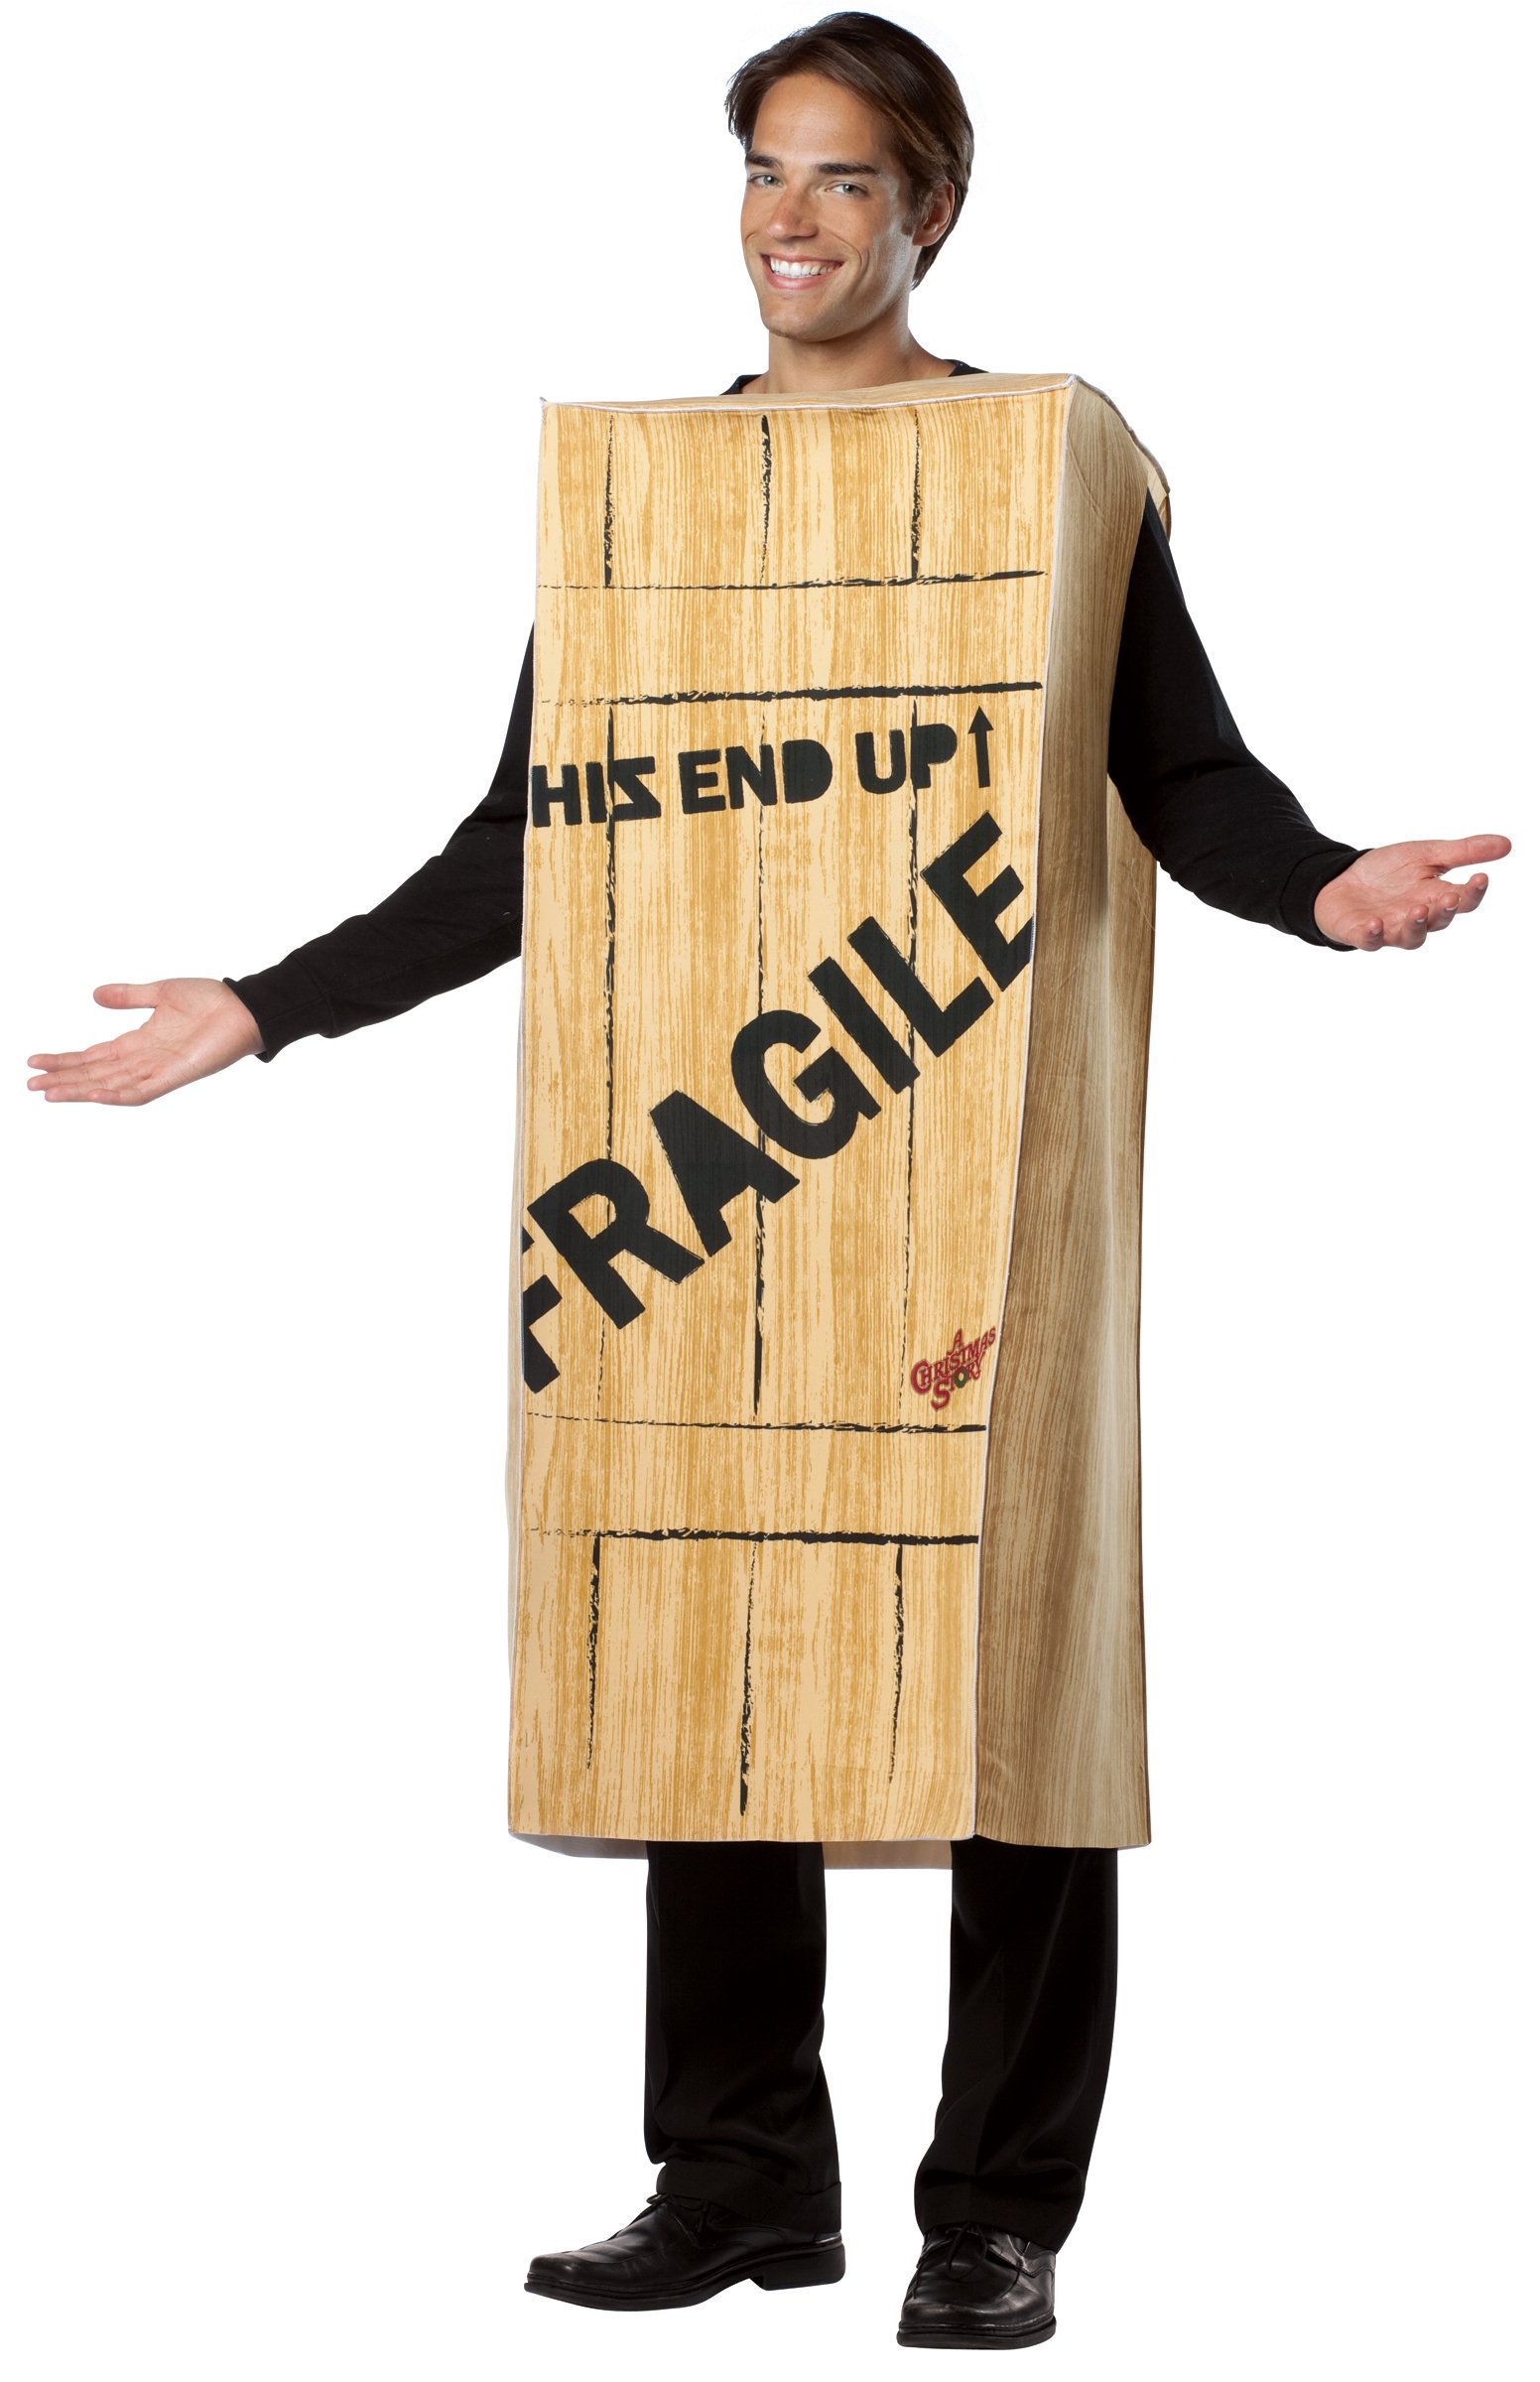 The A Christmas Story - Fragile Wooden Crate Adult Costume will be a favori...